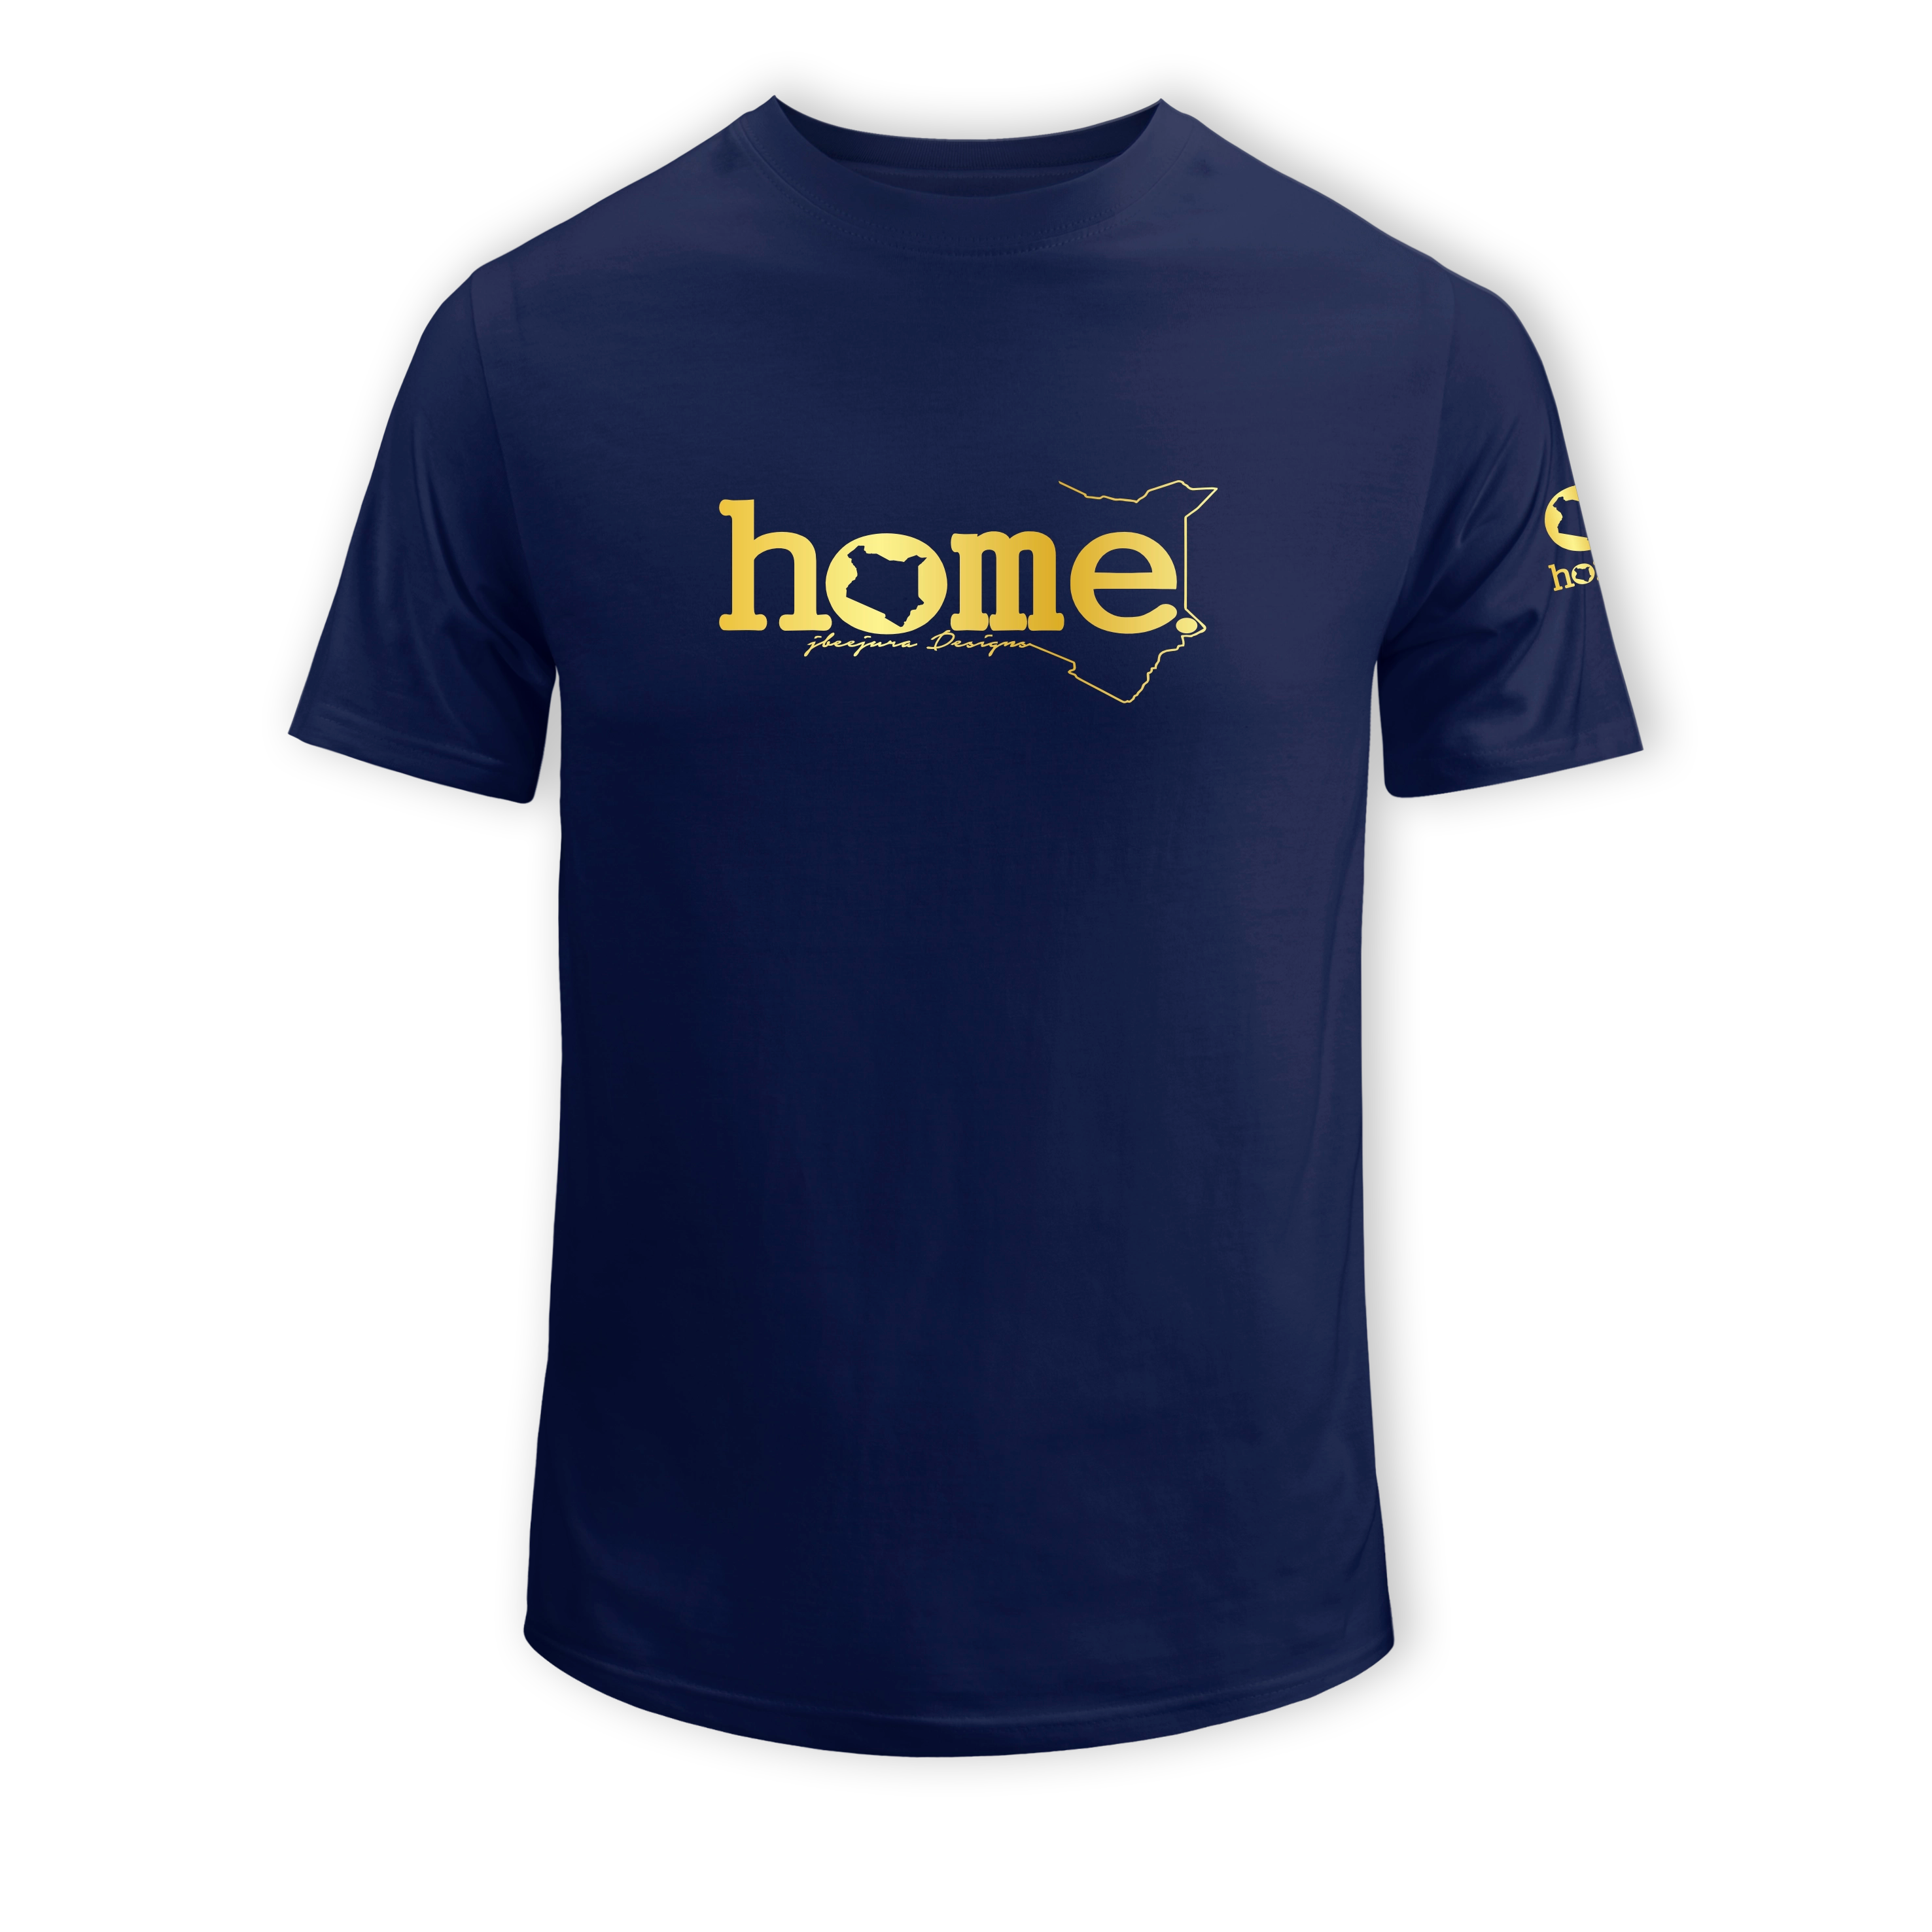 home_254 SHORT-SLEEVED NAVY BLUE T-SHIRT WITH A GOLD CLASSIC WORDS PRINT – COTTON PLUS FABRIC